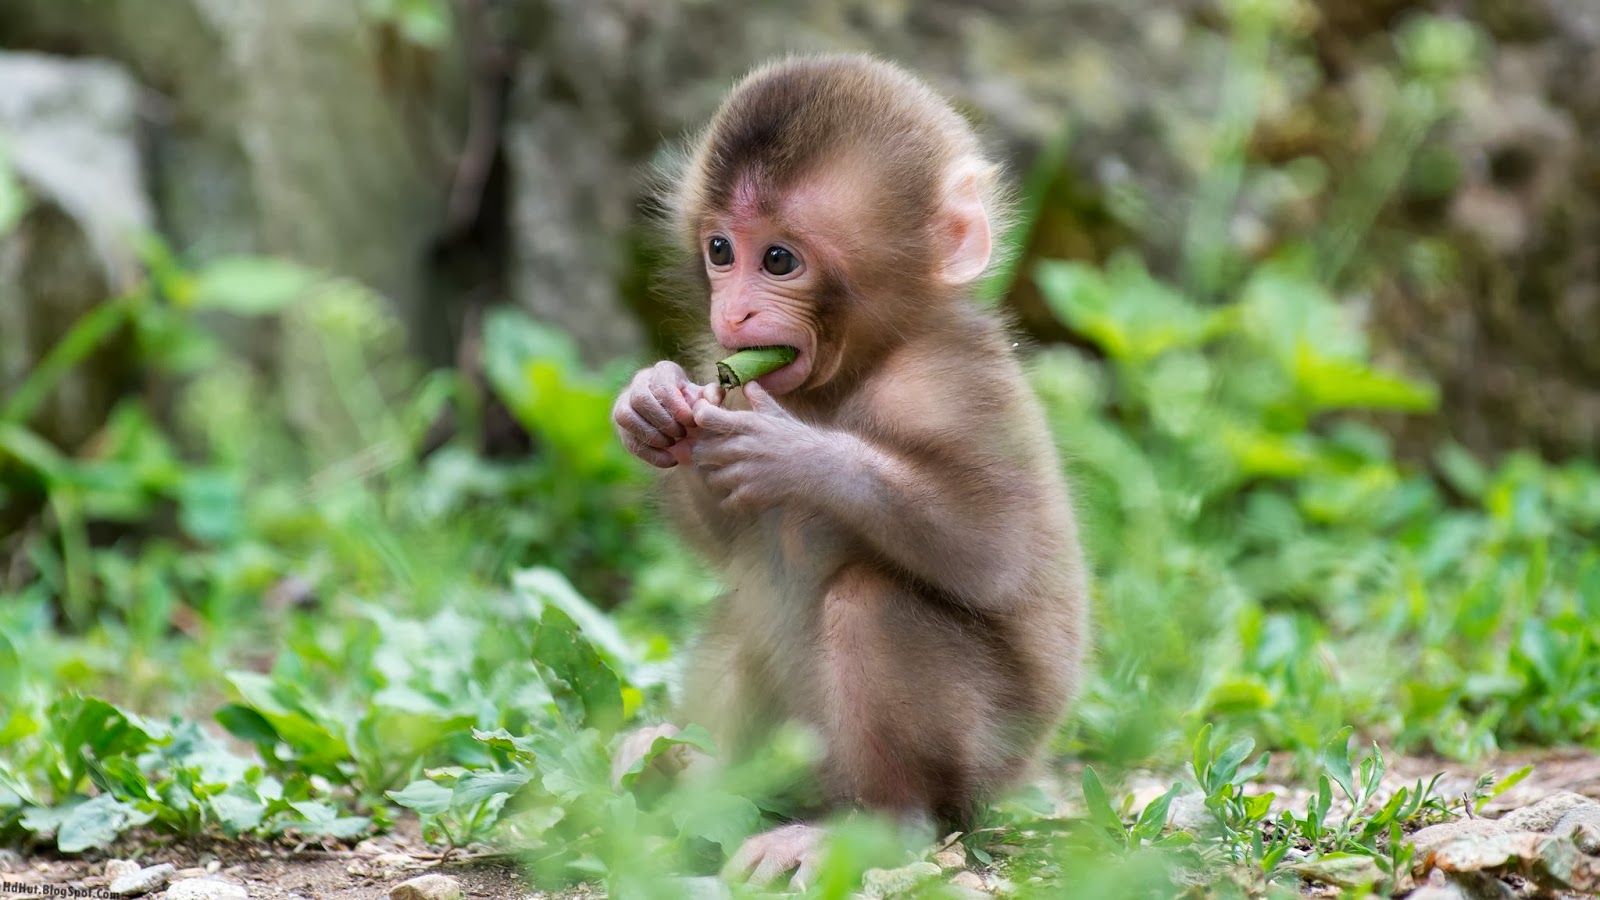 top 16 Most Cute And Beautiful Monkey Wallpapers In HD new